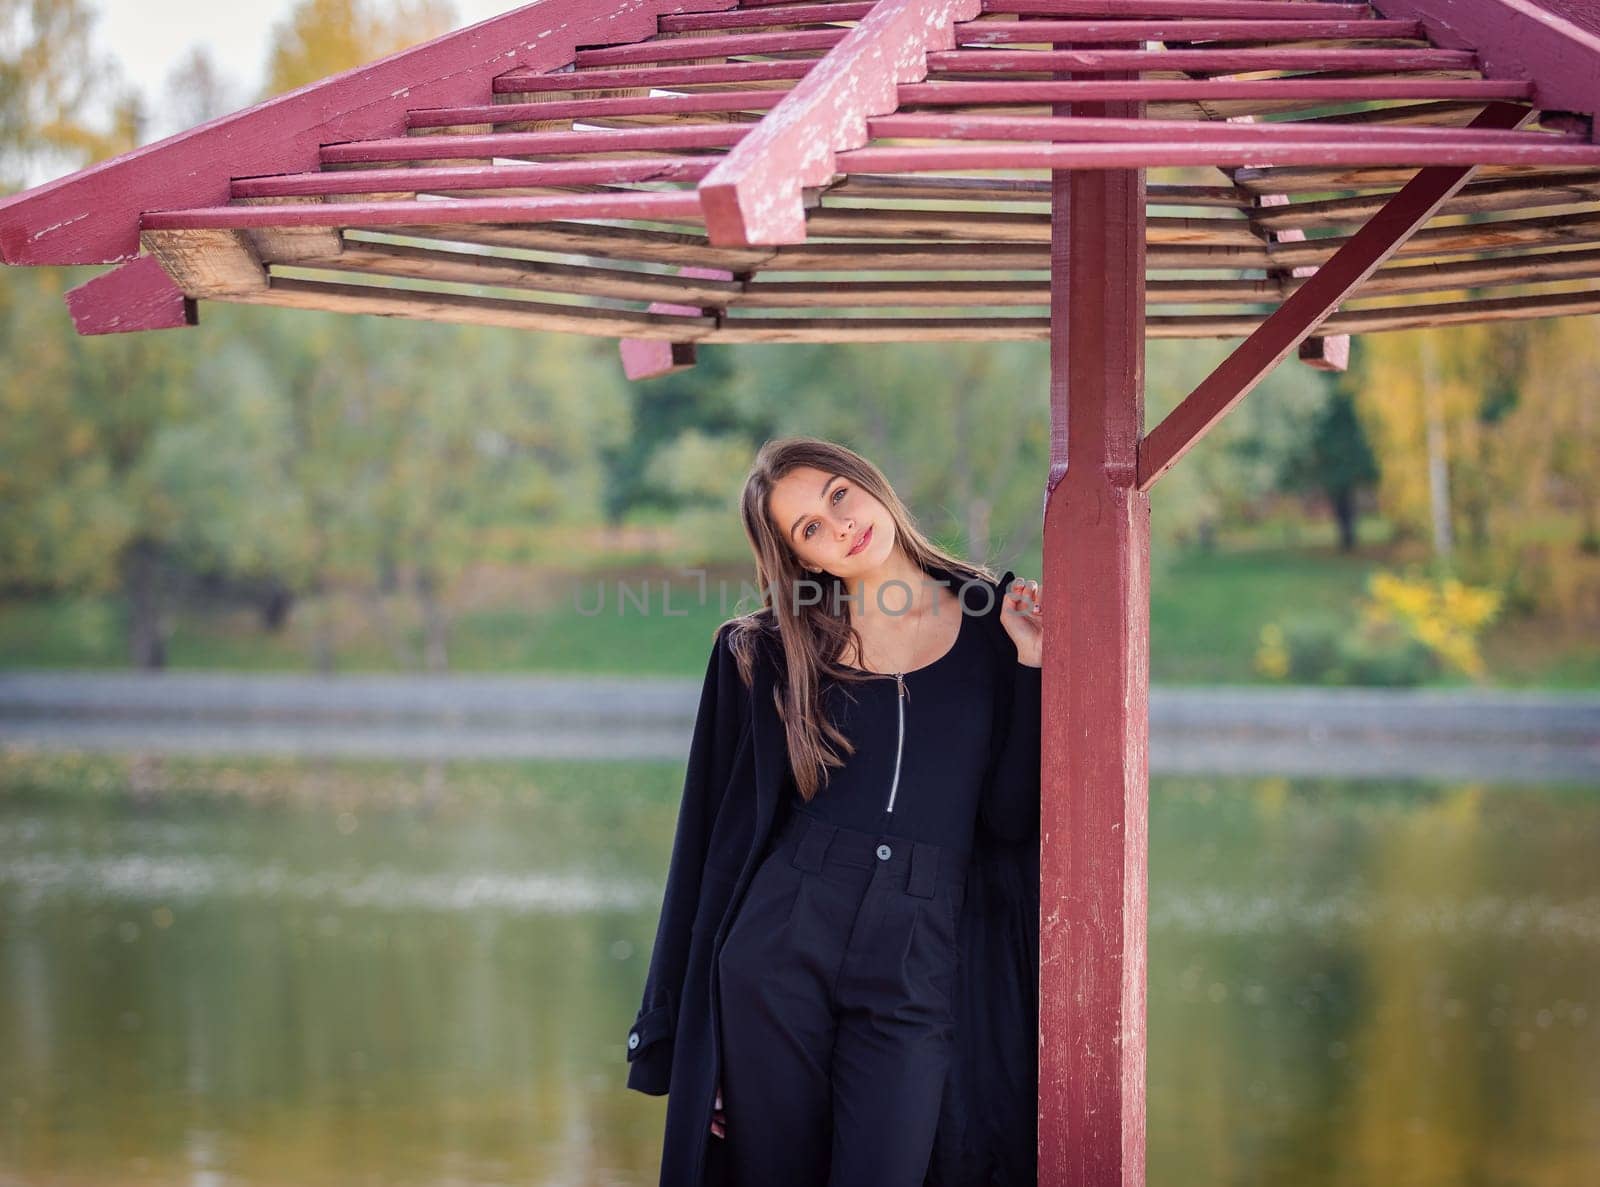 A beautiful girl poses while standing by a pond under an umbrella in an autumn park